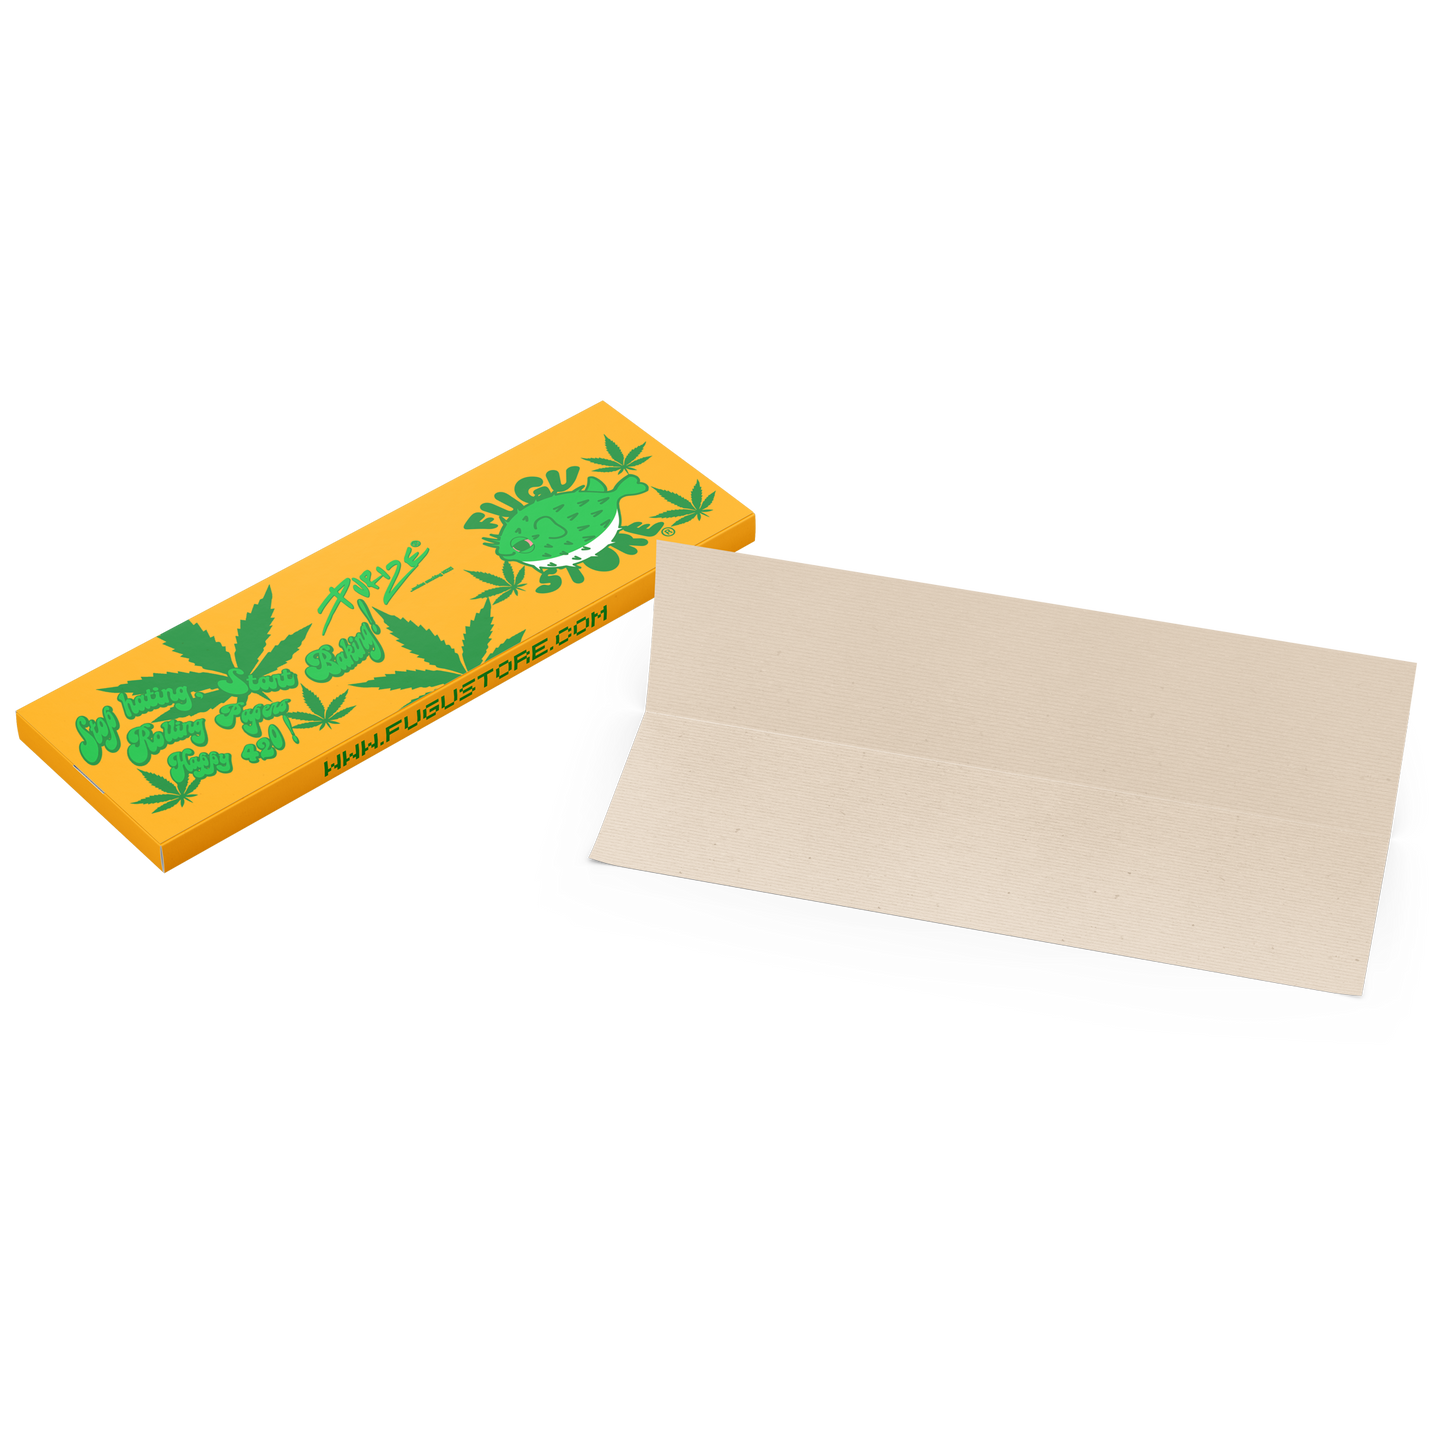 Purize King Size Slim Rolling Papers